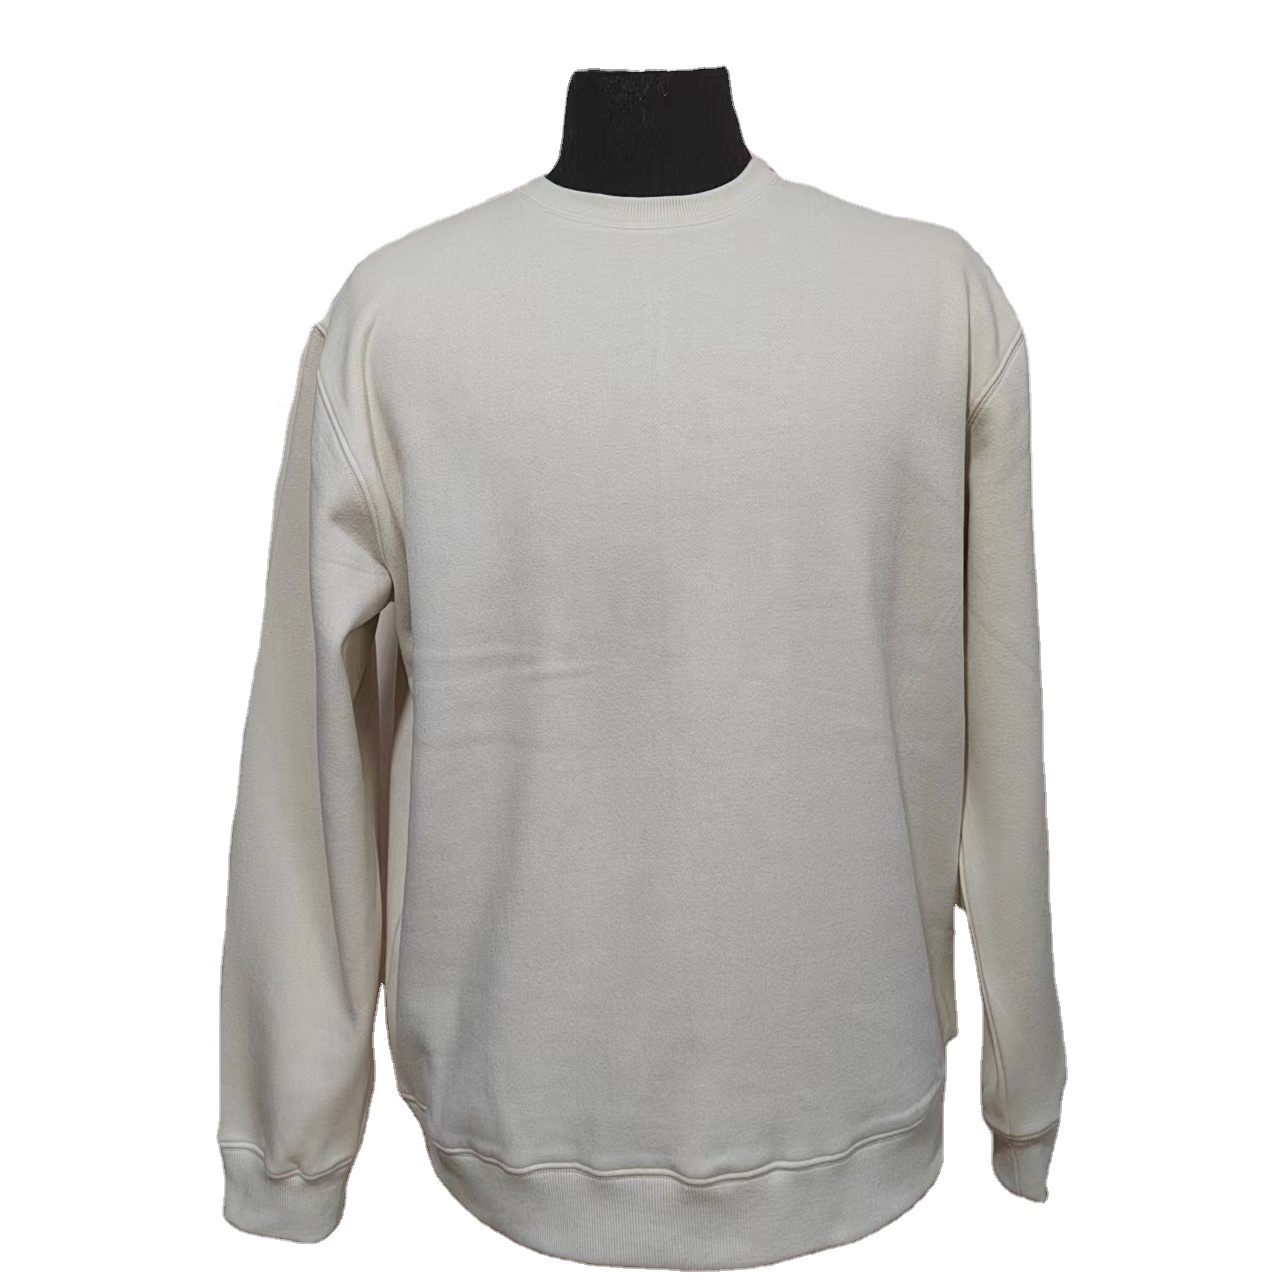 Customize beige crew neck sweatshirts high quality plus size recycled polyester cotton unisex sweater in bulk